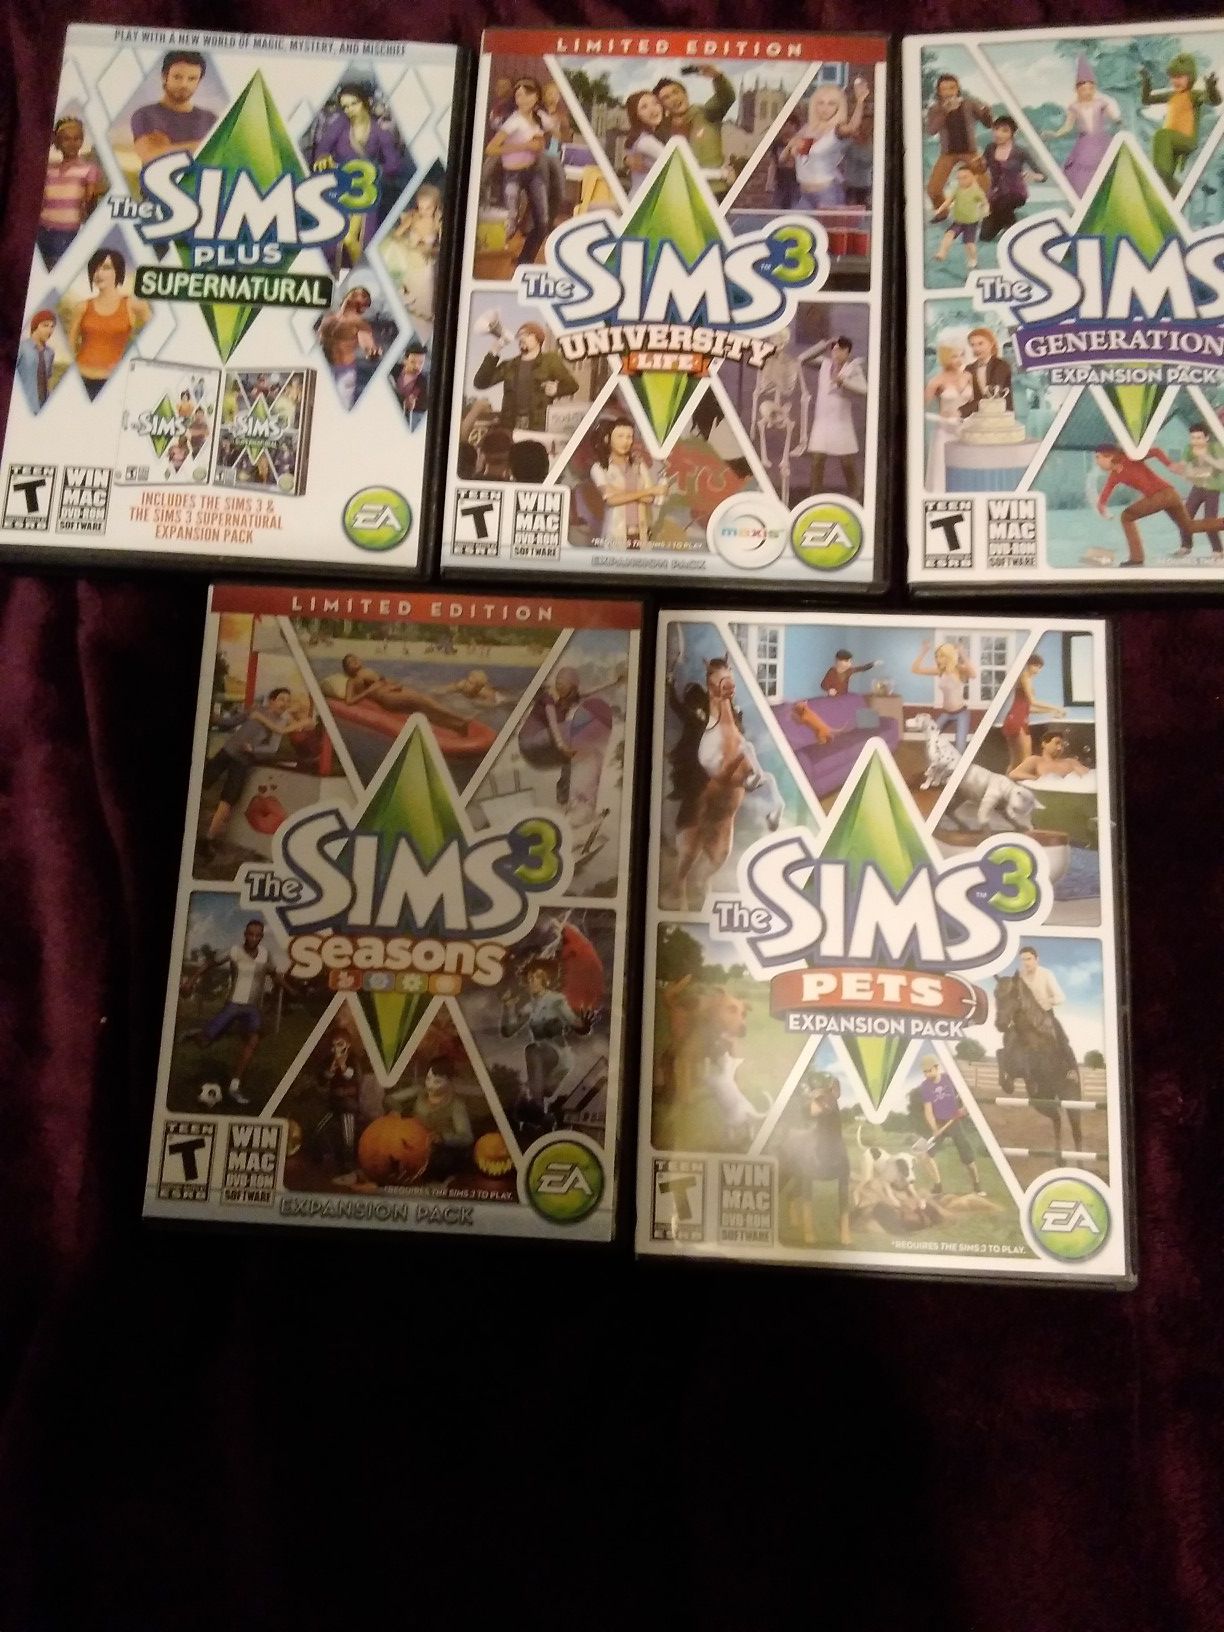 5 Sims games for pc, Mac. Or windows